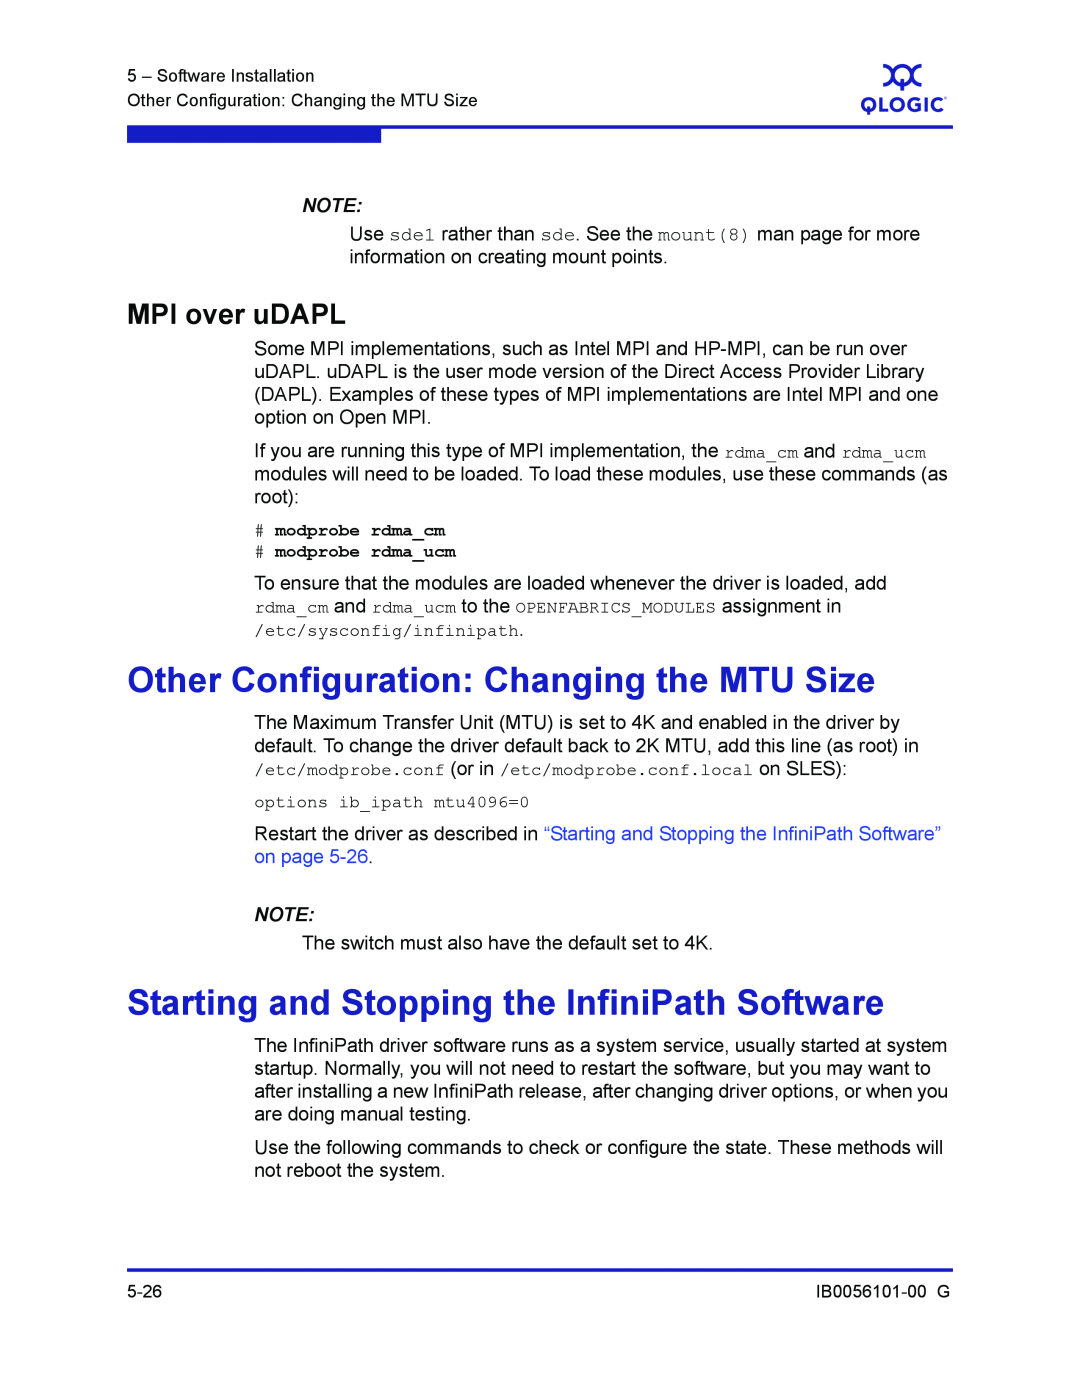 Q-Logic IB0056101-00 G manual Other Configuration Changing the MTU Size, Starting and Stopping the InfiniPath Software 